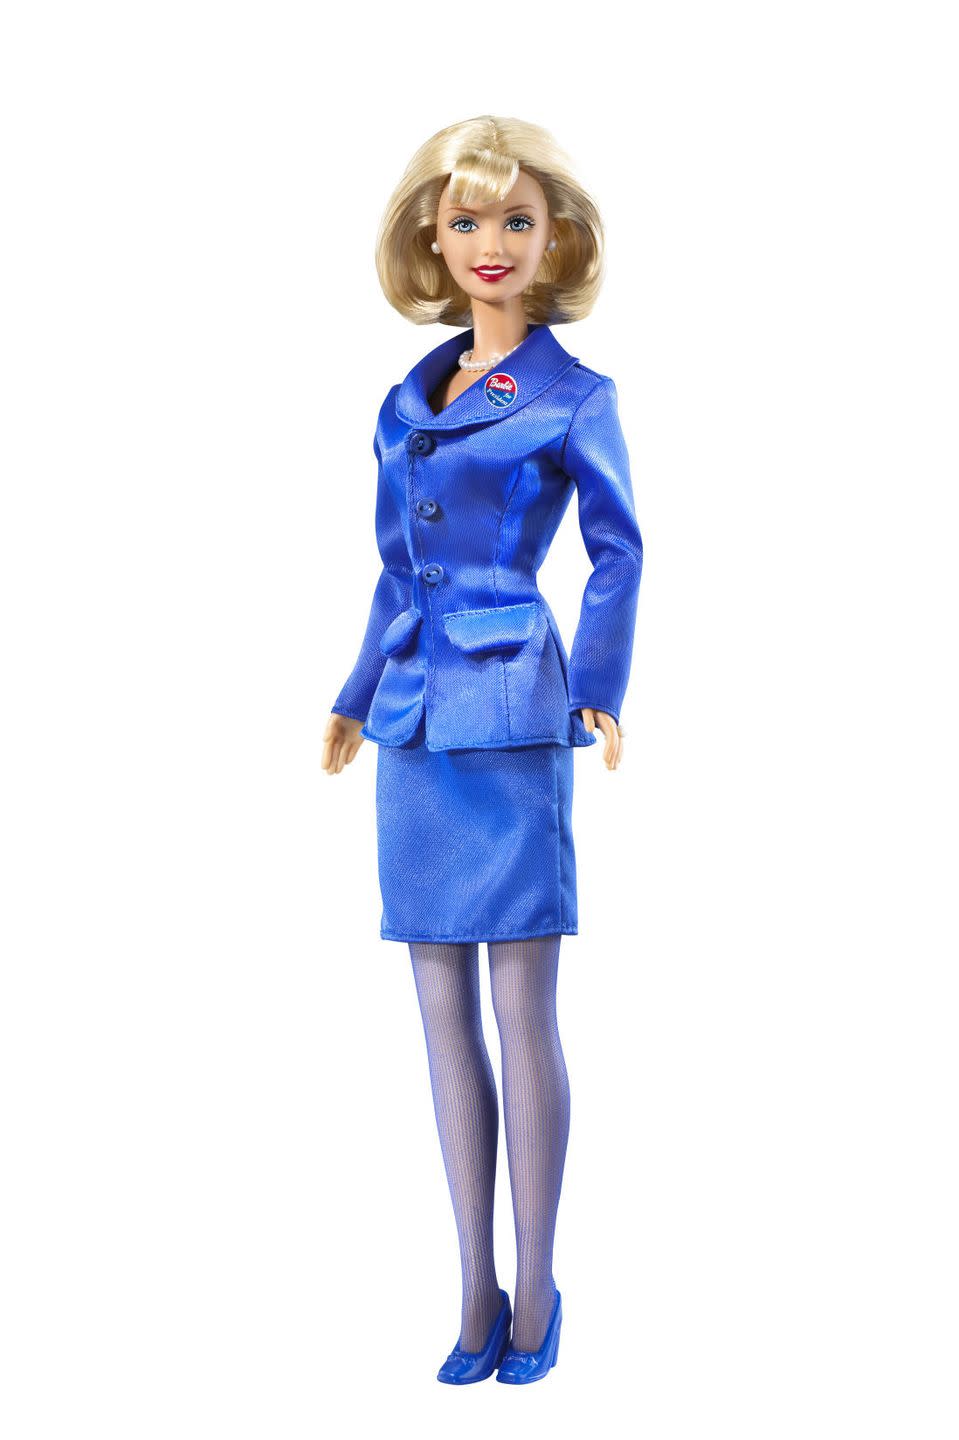 clothing, blue, barbie, doll, standing, electric blue, cobalt blue, toy, outerwear, sleeve,